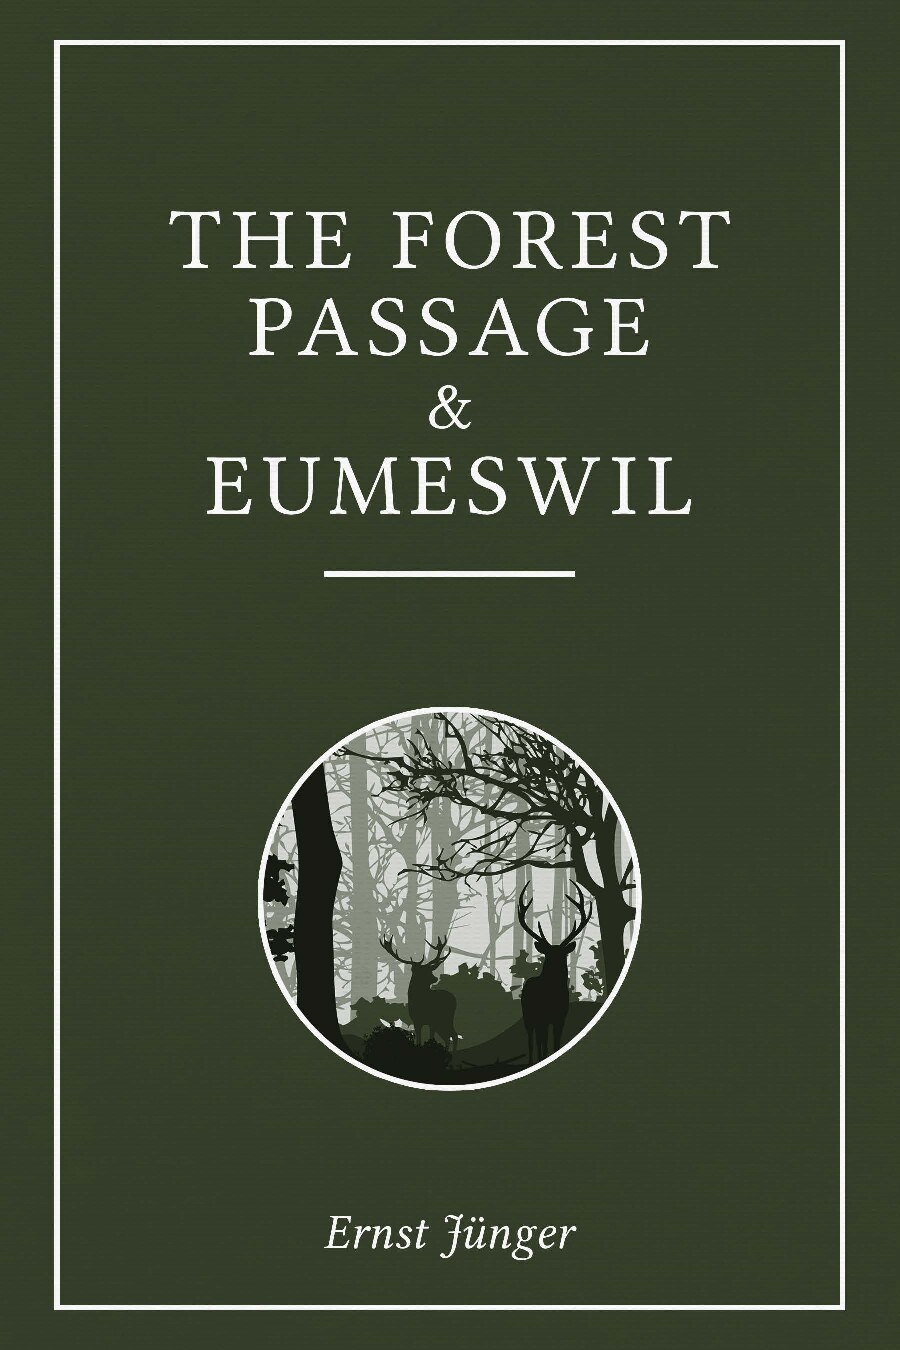 The Forest Passage & Eumeswil